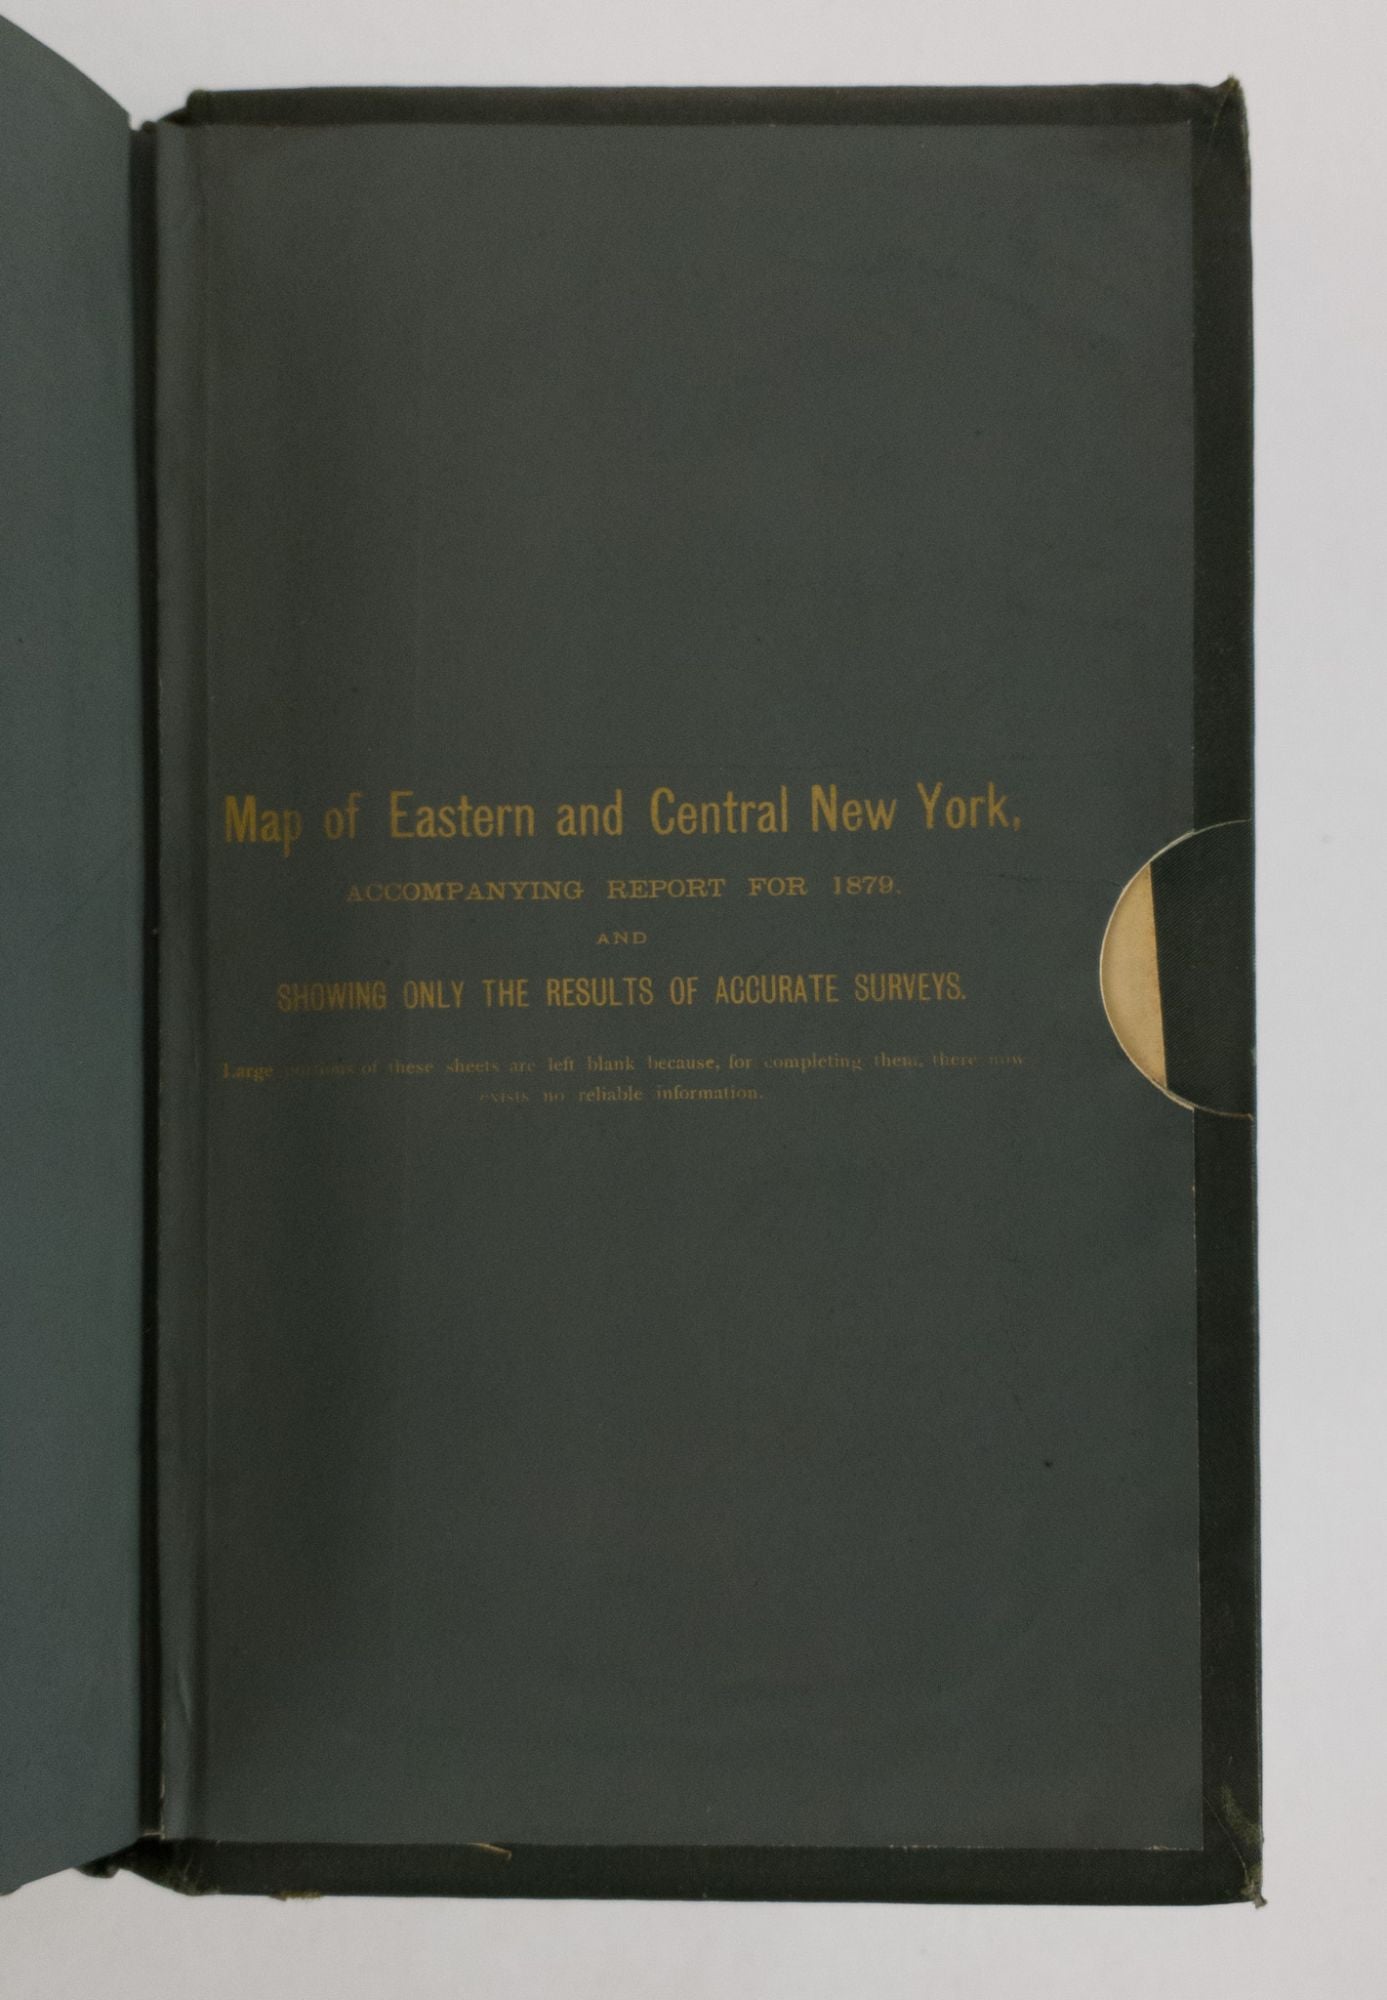 Product Image for SPECIAL REPORT OF NEW YORK STATE SURVEY ON THE PRESERVATION OF THE SCENERY OF NIAGARA FALLS, AND FOURTH ANNUAL REPORT ON THE TRIANGULATION OF THE STATE FOR THE YEAR 1879